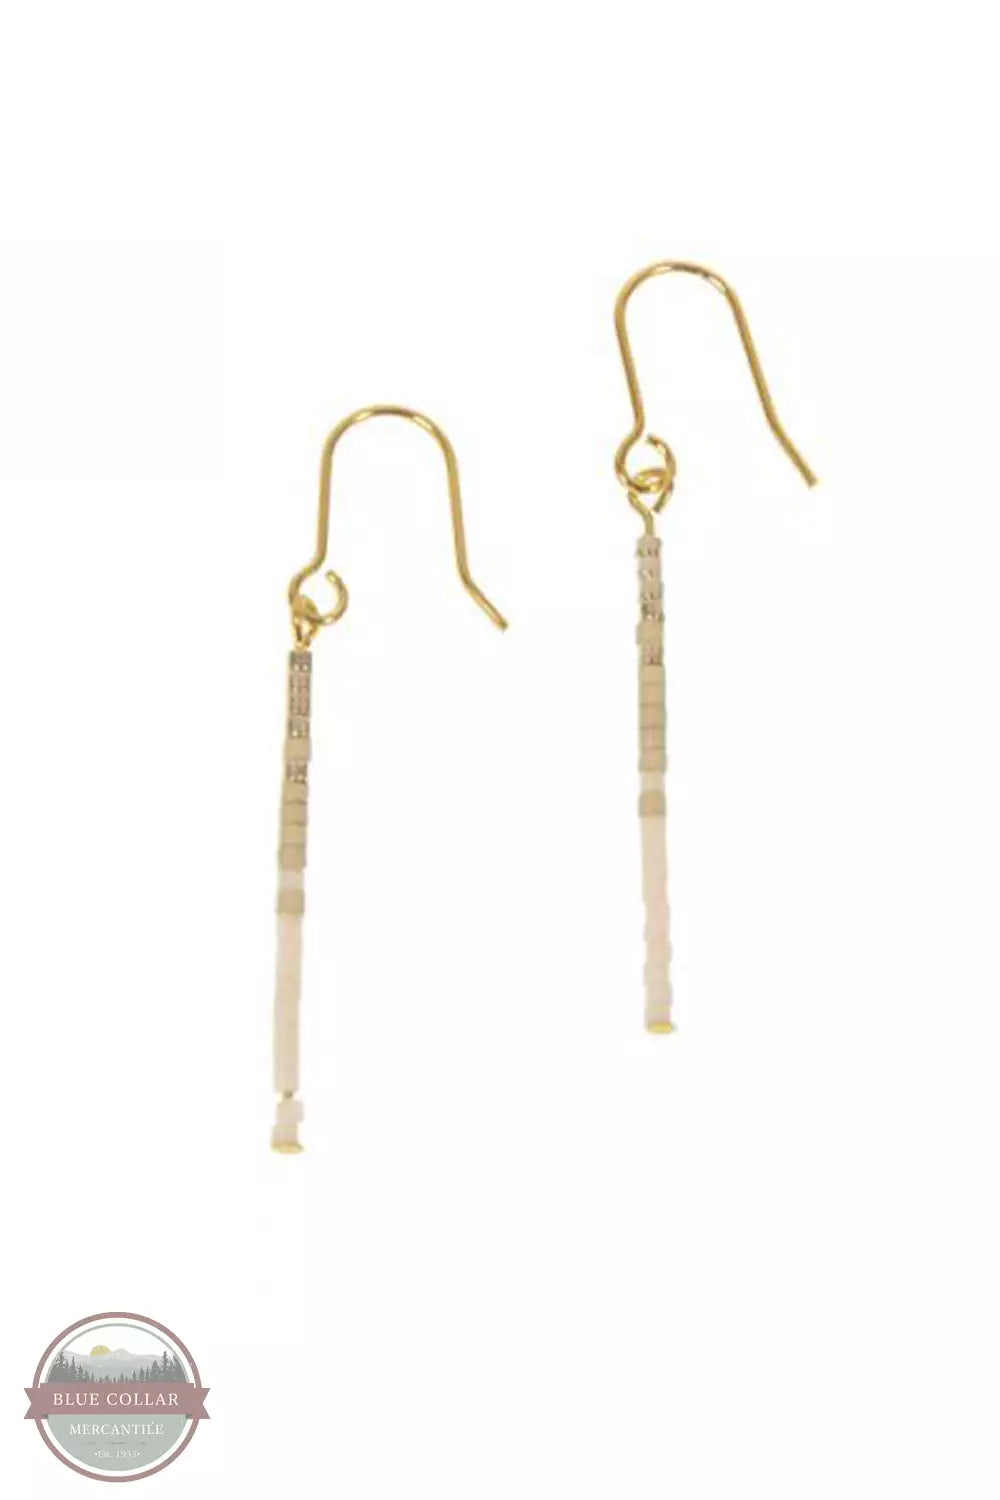 Gold Long Bar with Beads Earrings by Joy Susan 341-12